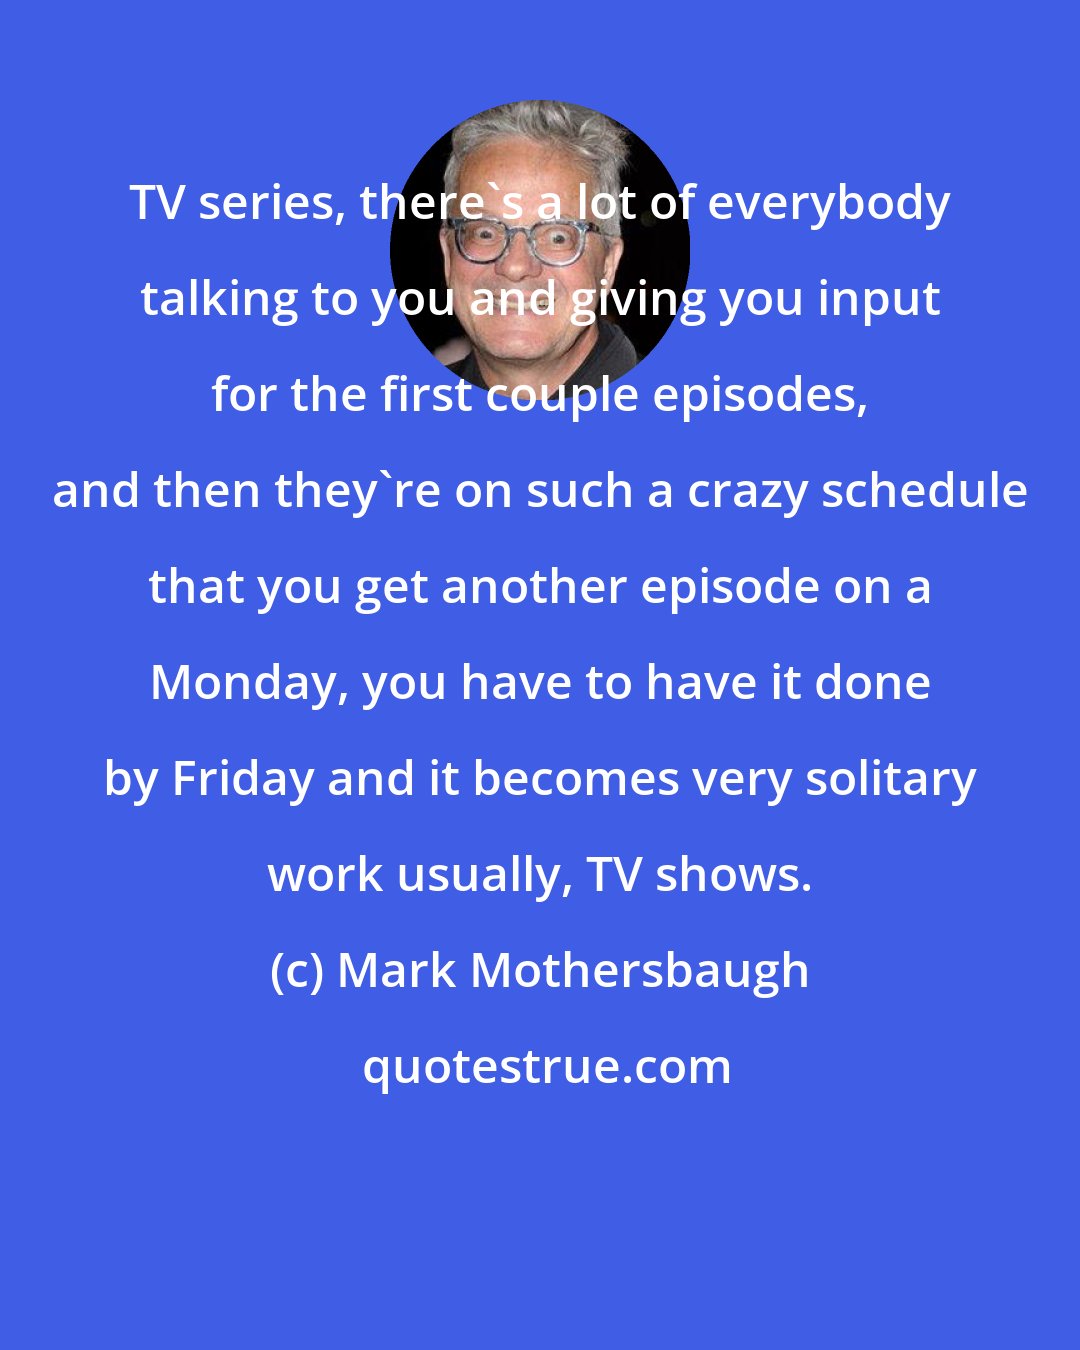 Mark Mothersbaugh: TV series, there's a lot of everybody talking to you and giving you input for the first couple episodes, and then they're on such a crazy schedule that you get another episode on a Monday, you have to have it done by Friday and it becomes very solitary work usually, TV shows.